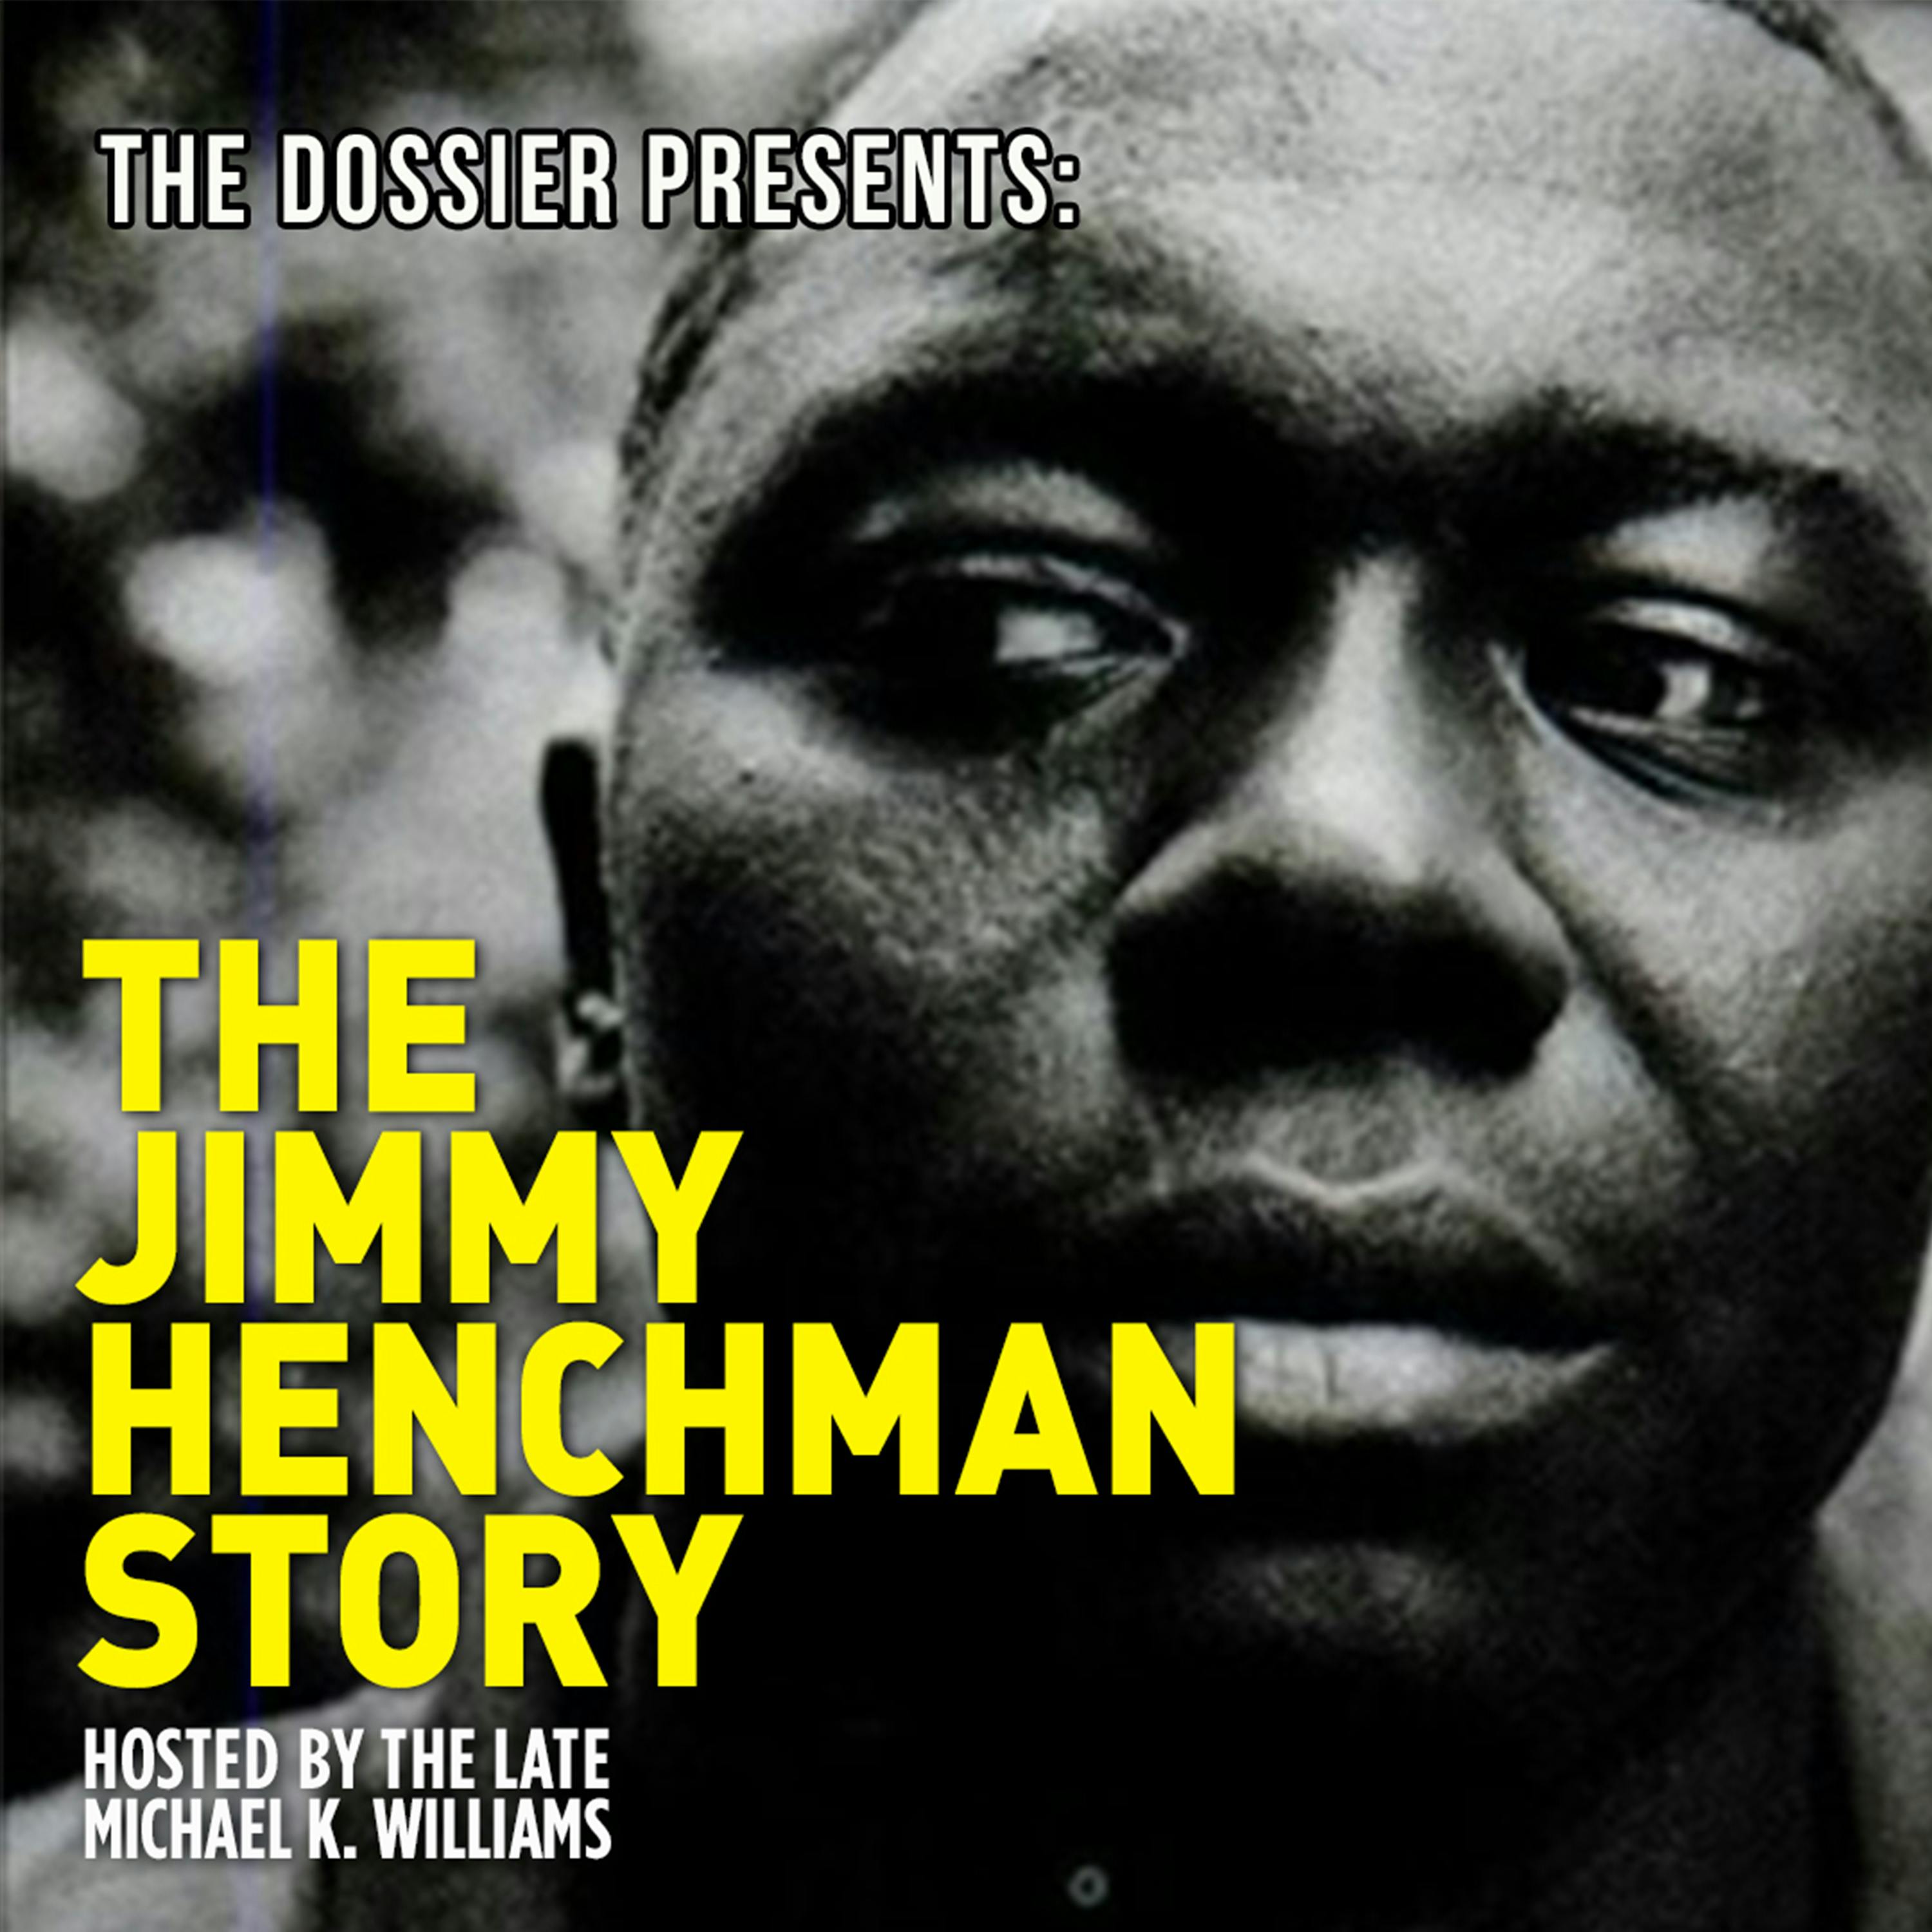 THE JIMMY HENCHMAN STORY - EP. 6 - RIVALRIES